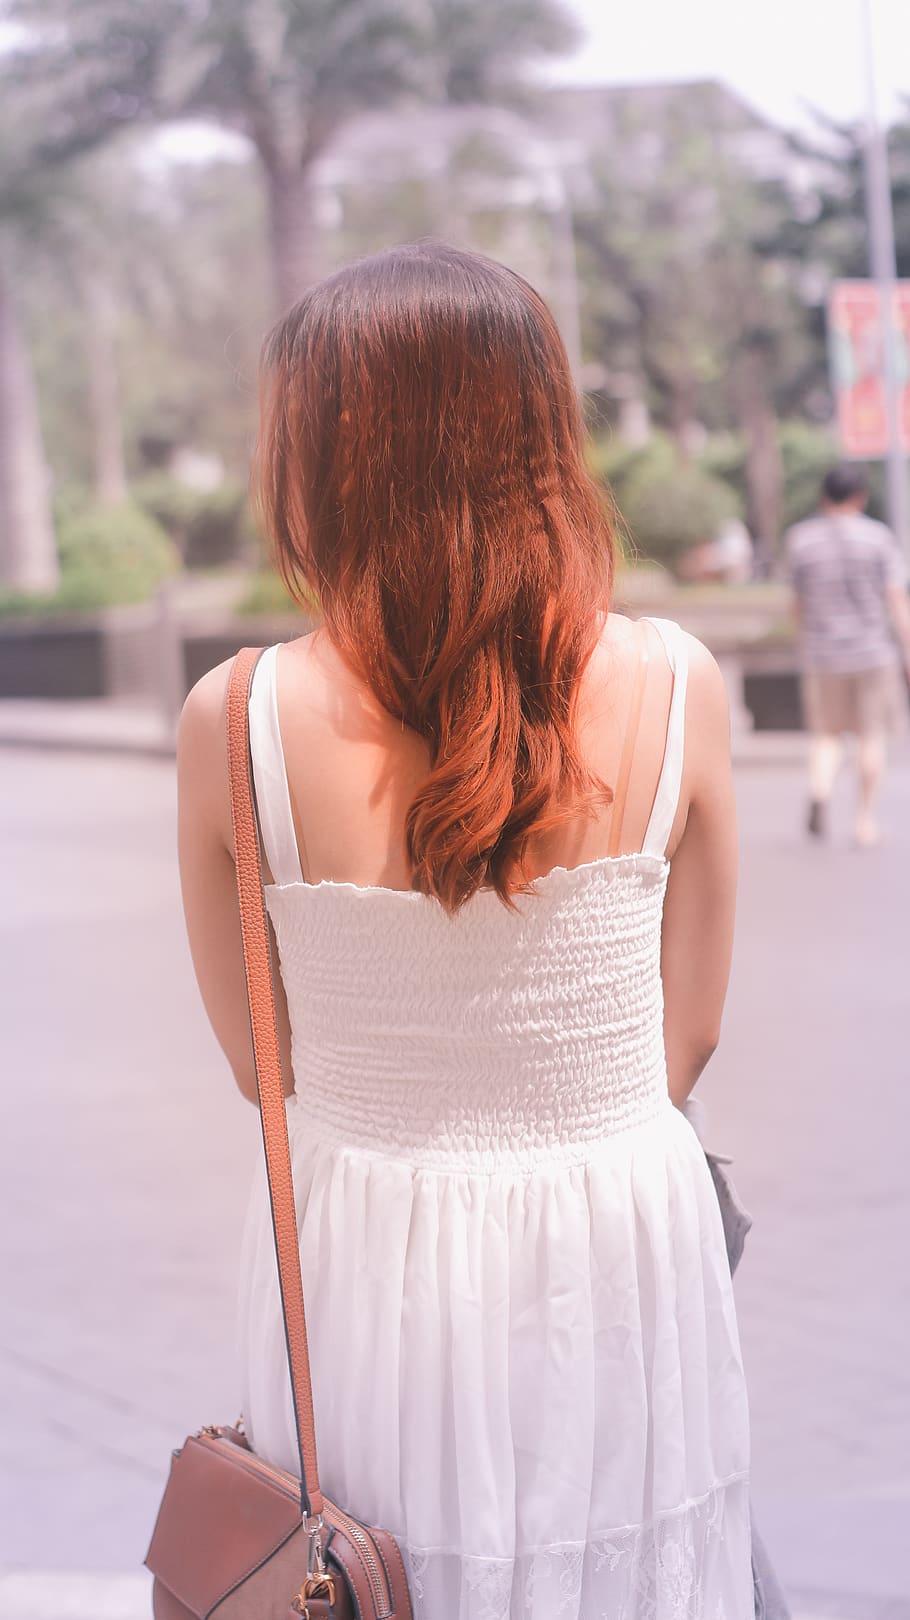 portrait, sad, female, people, young, hair, cool, rear view, real people, one person